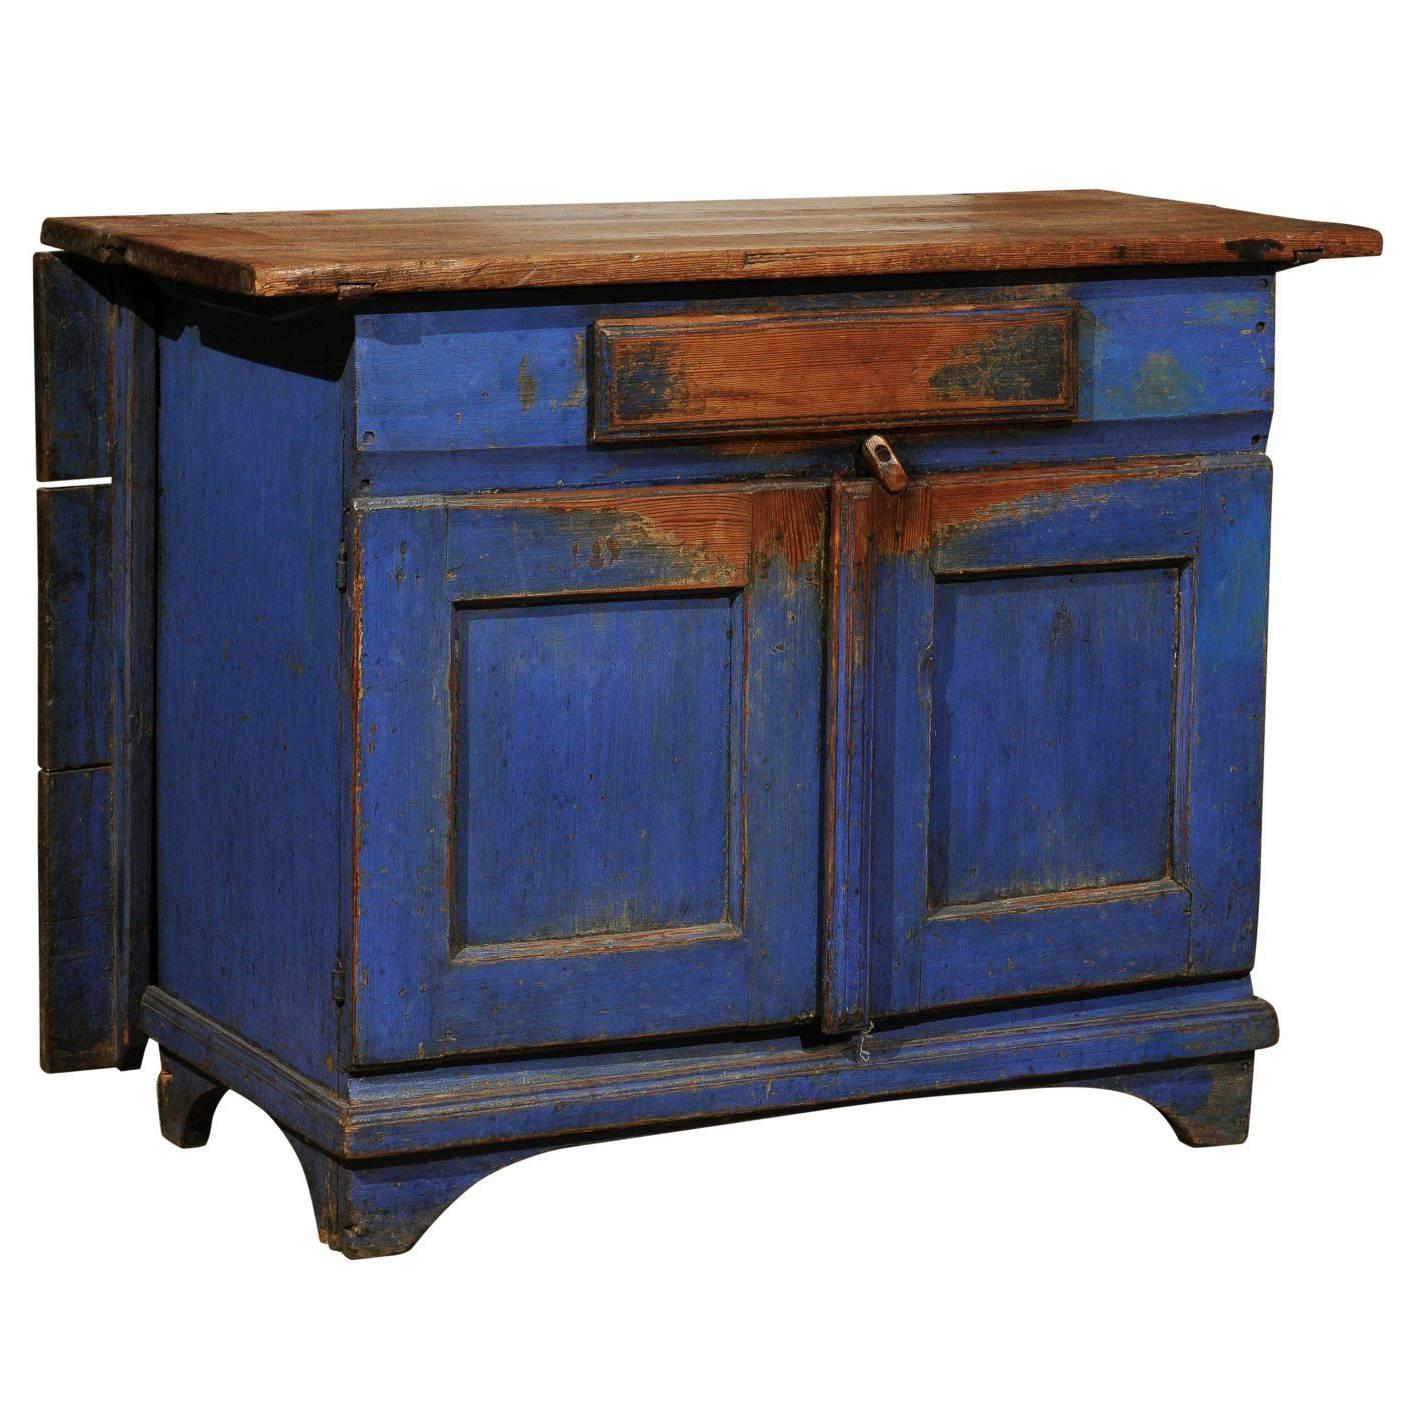 Swedish Blue Painted Buffet with Drop-Leaf Table Attached, Circa 1858